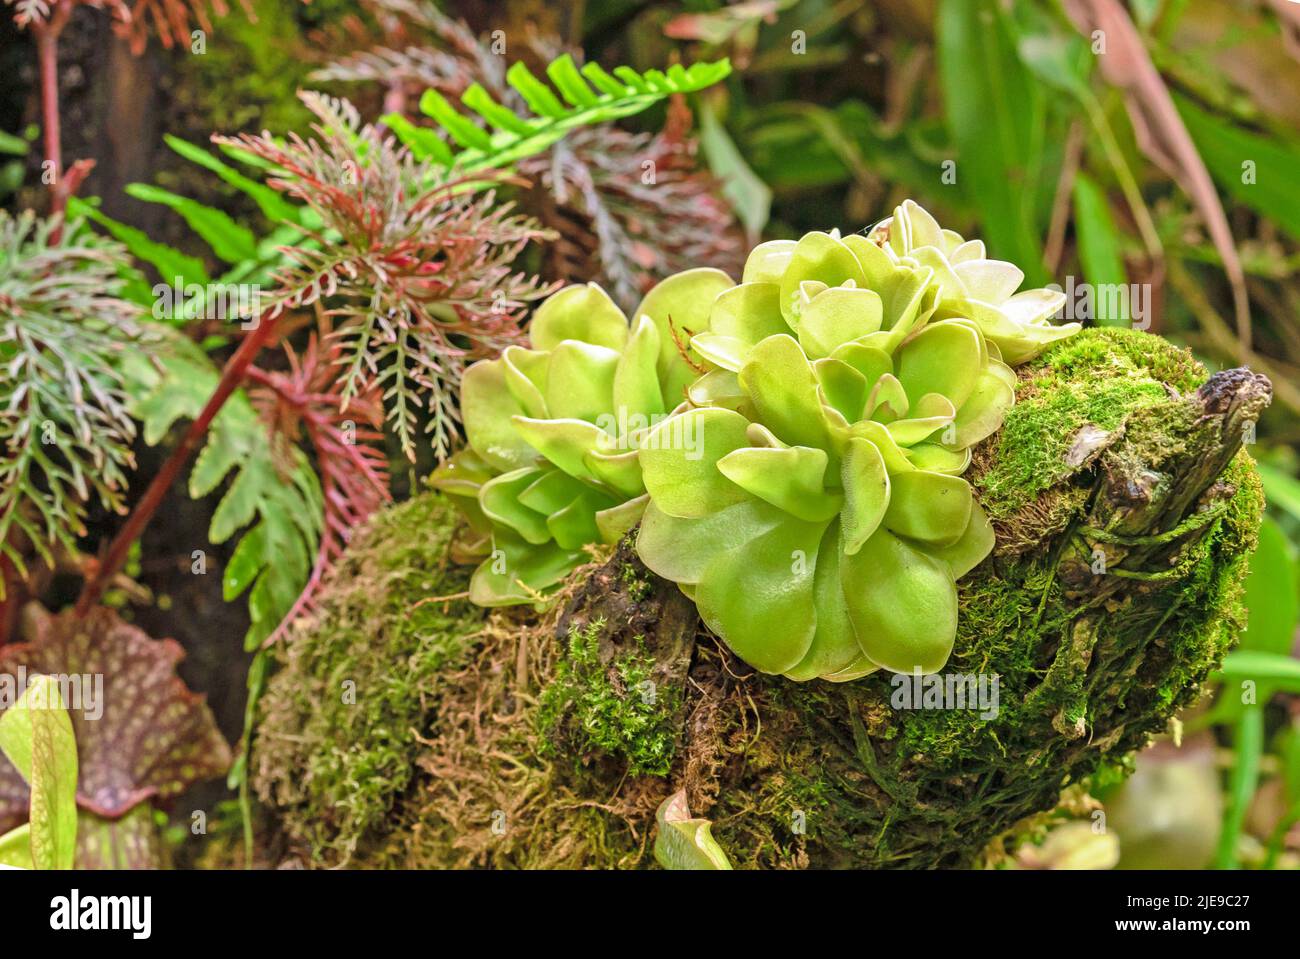 Carnivorous plant butterworts Pinguicula in a tropical greenhouse. Stock Photo